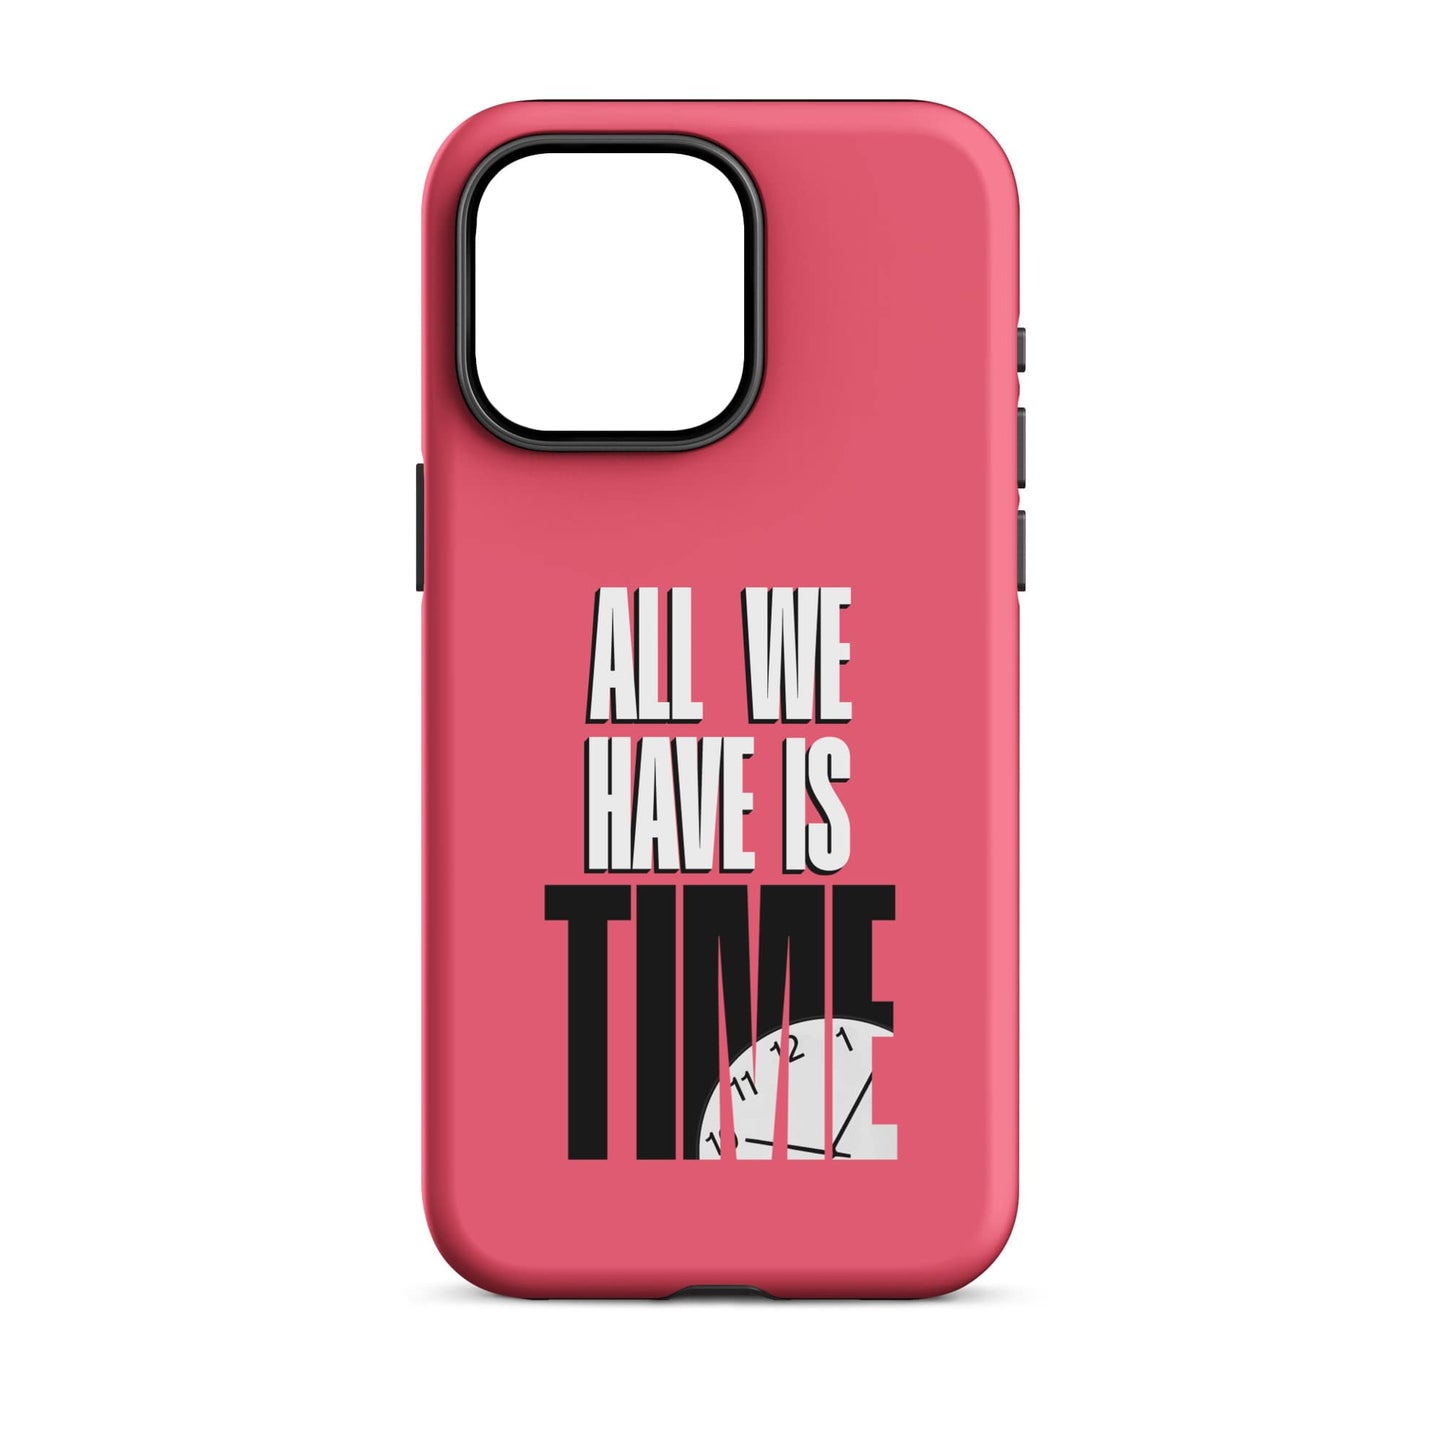 All We Have Is Time - 2D (Pink) Quoted iPhone Case